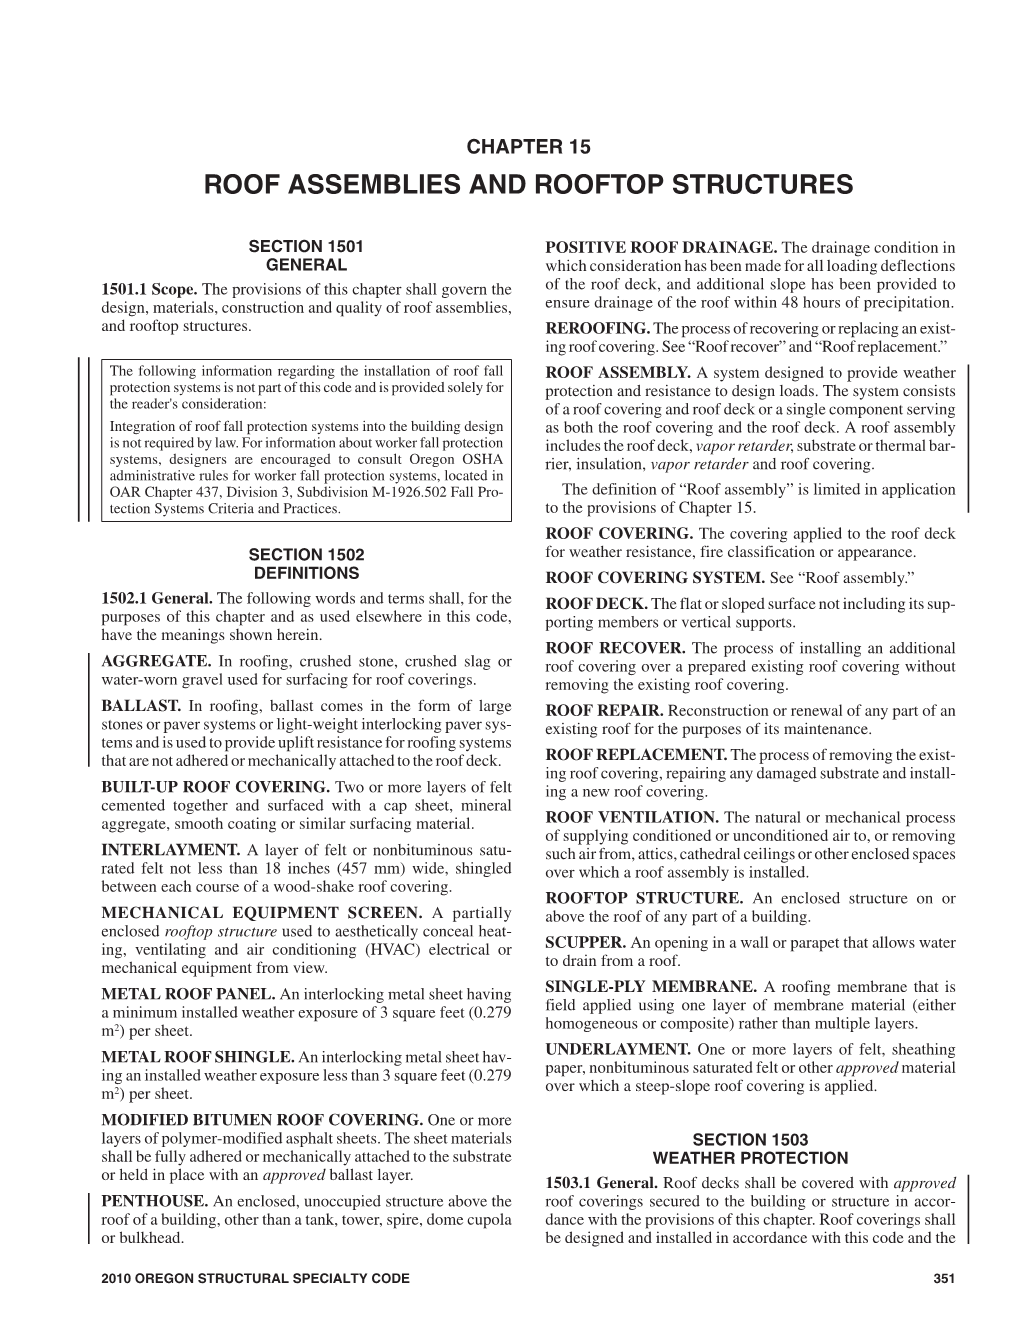 Chapter 15 Roof Assemblies and Rooftop Structures